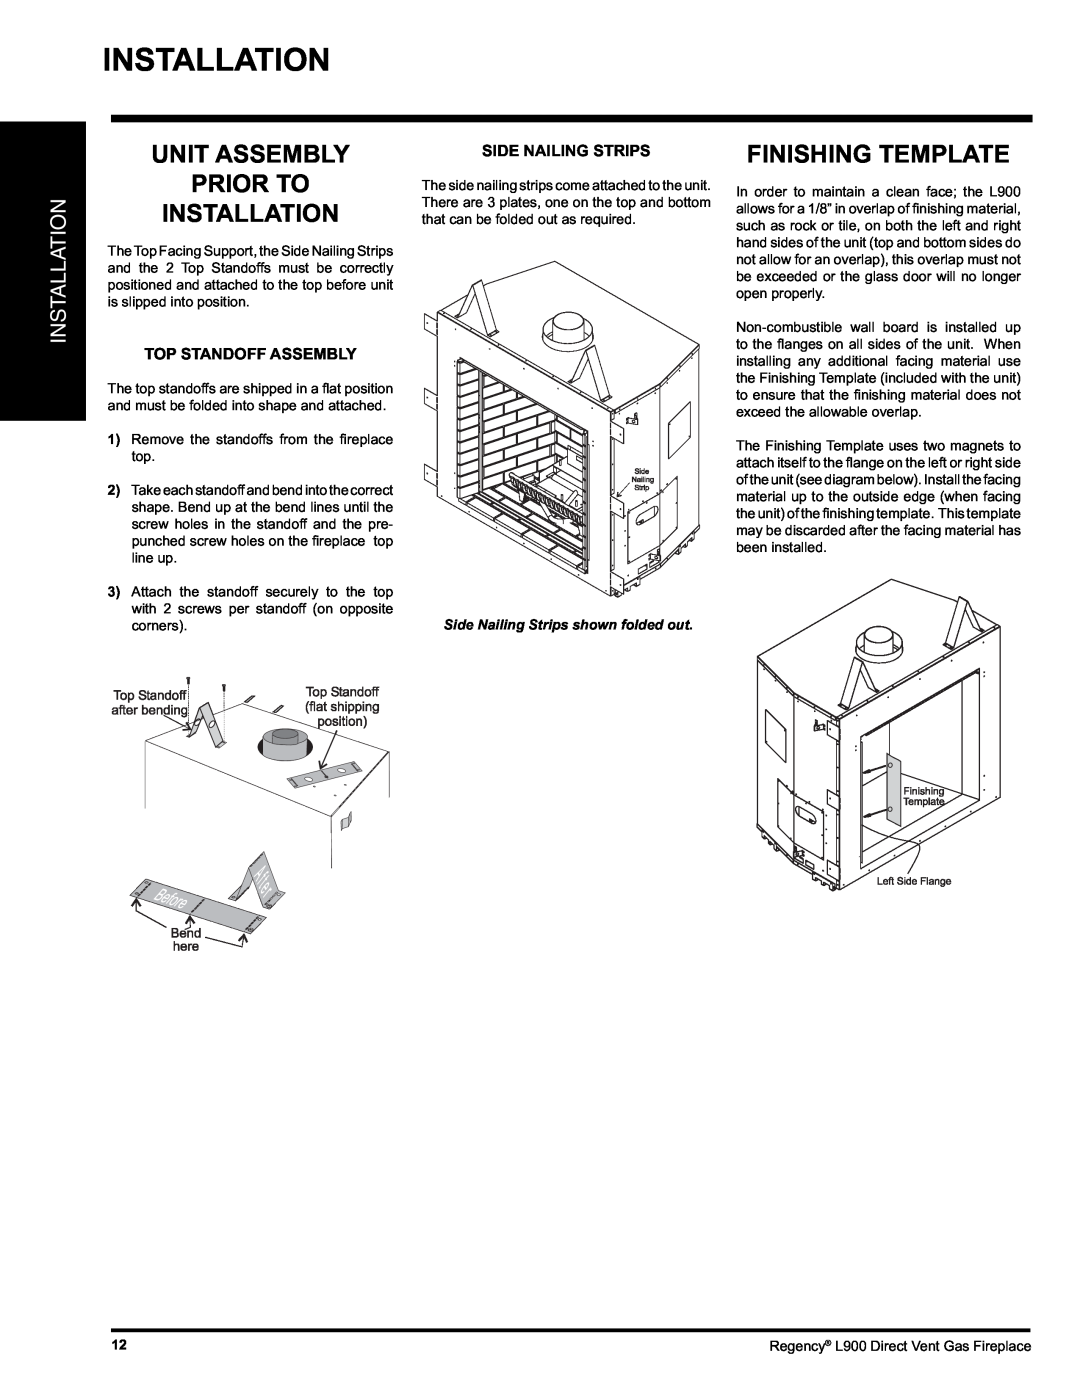 Regency L900-LP, L900-NG installation manual Unit Assembly, Prior To Installation, Finishing Template 